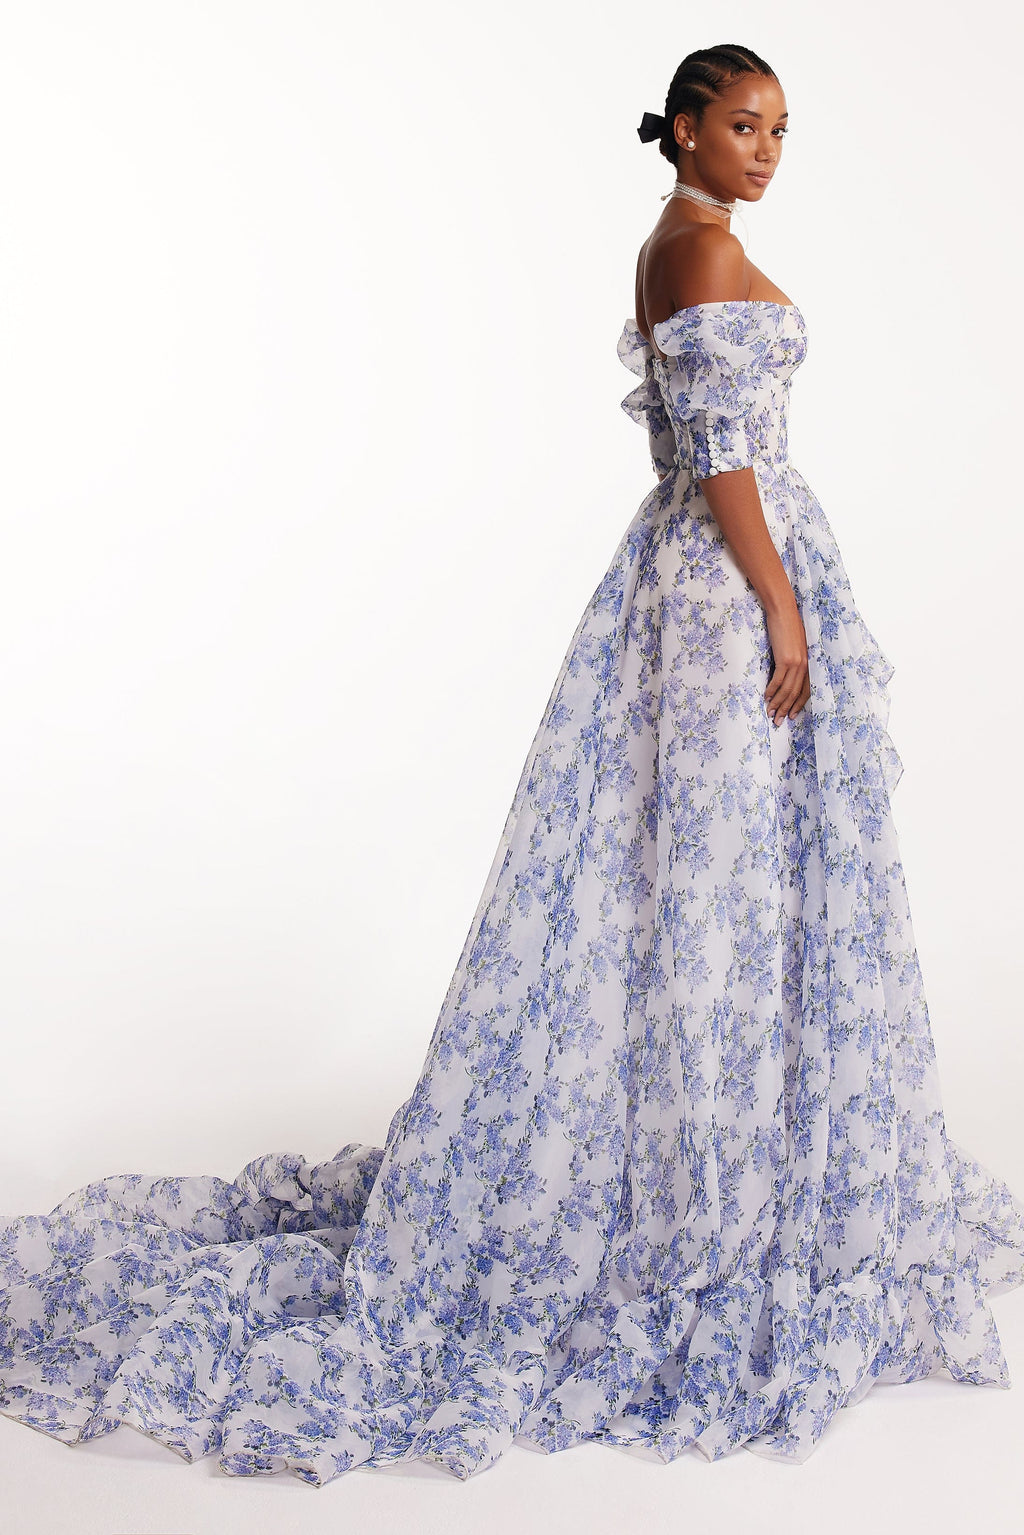 Long printed party dress for evening weddings | INVITADISIMA